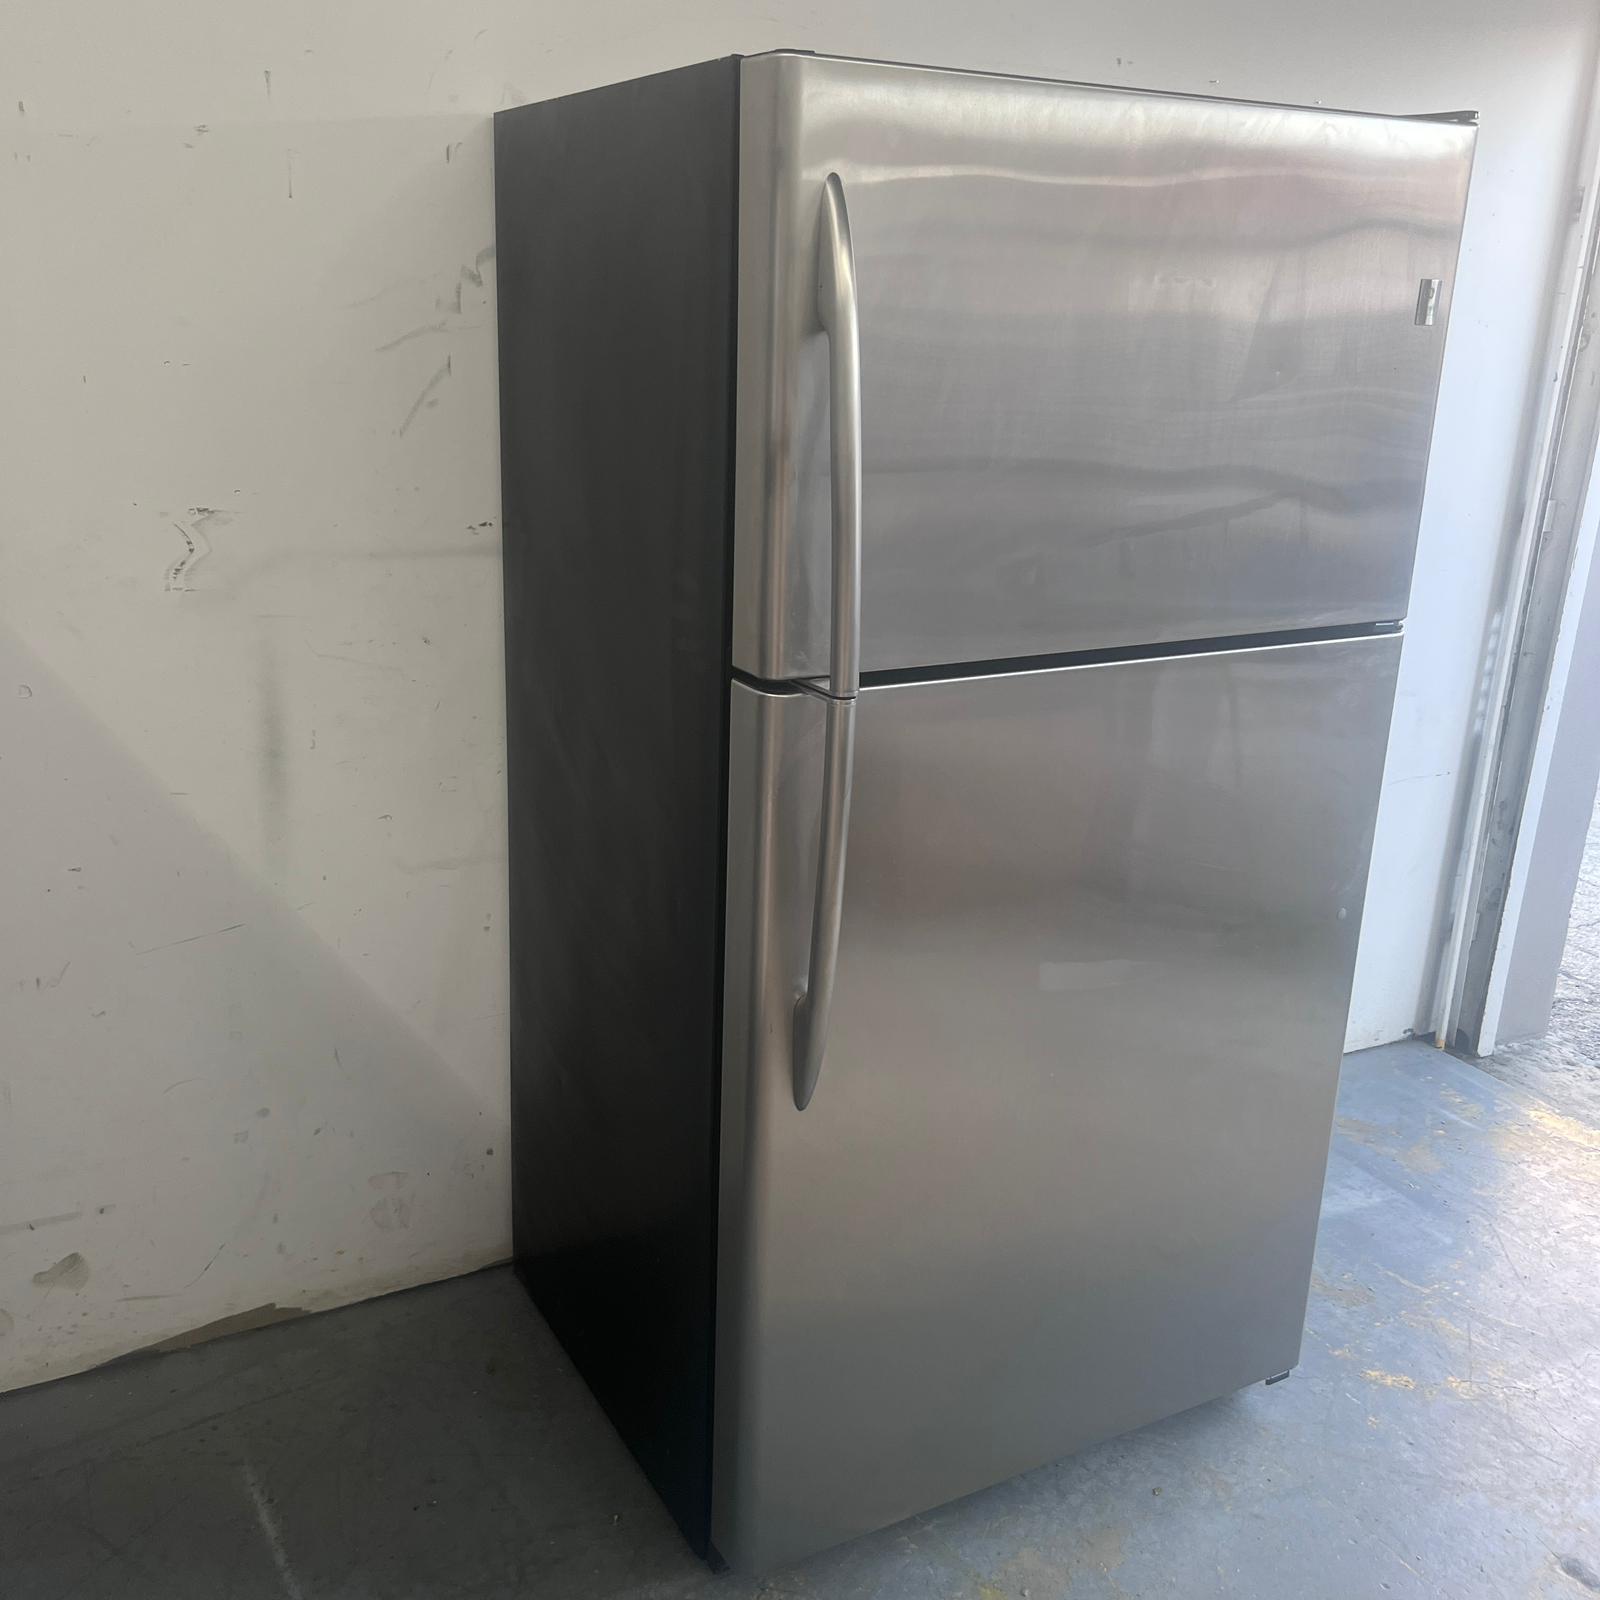 GE Profile Stainless Steel Top and Bottom Refrigerator